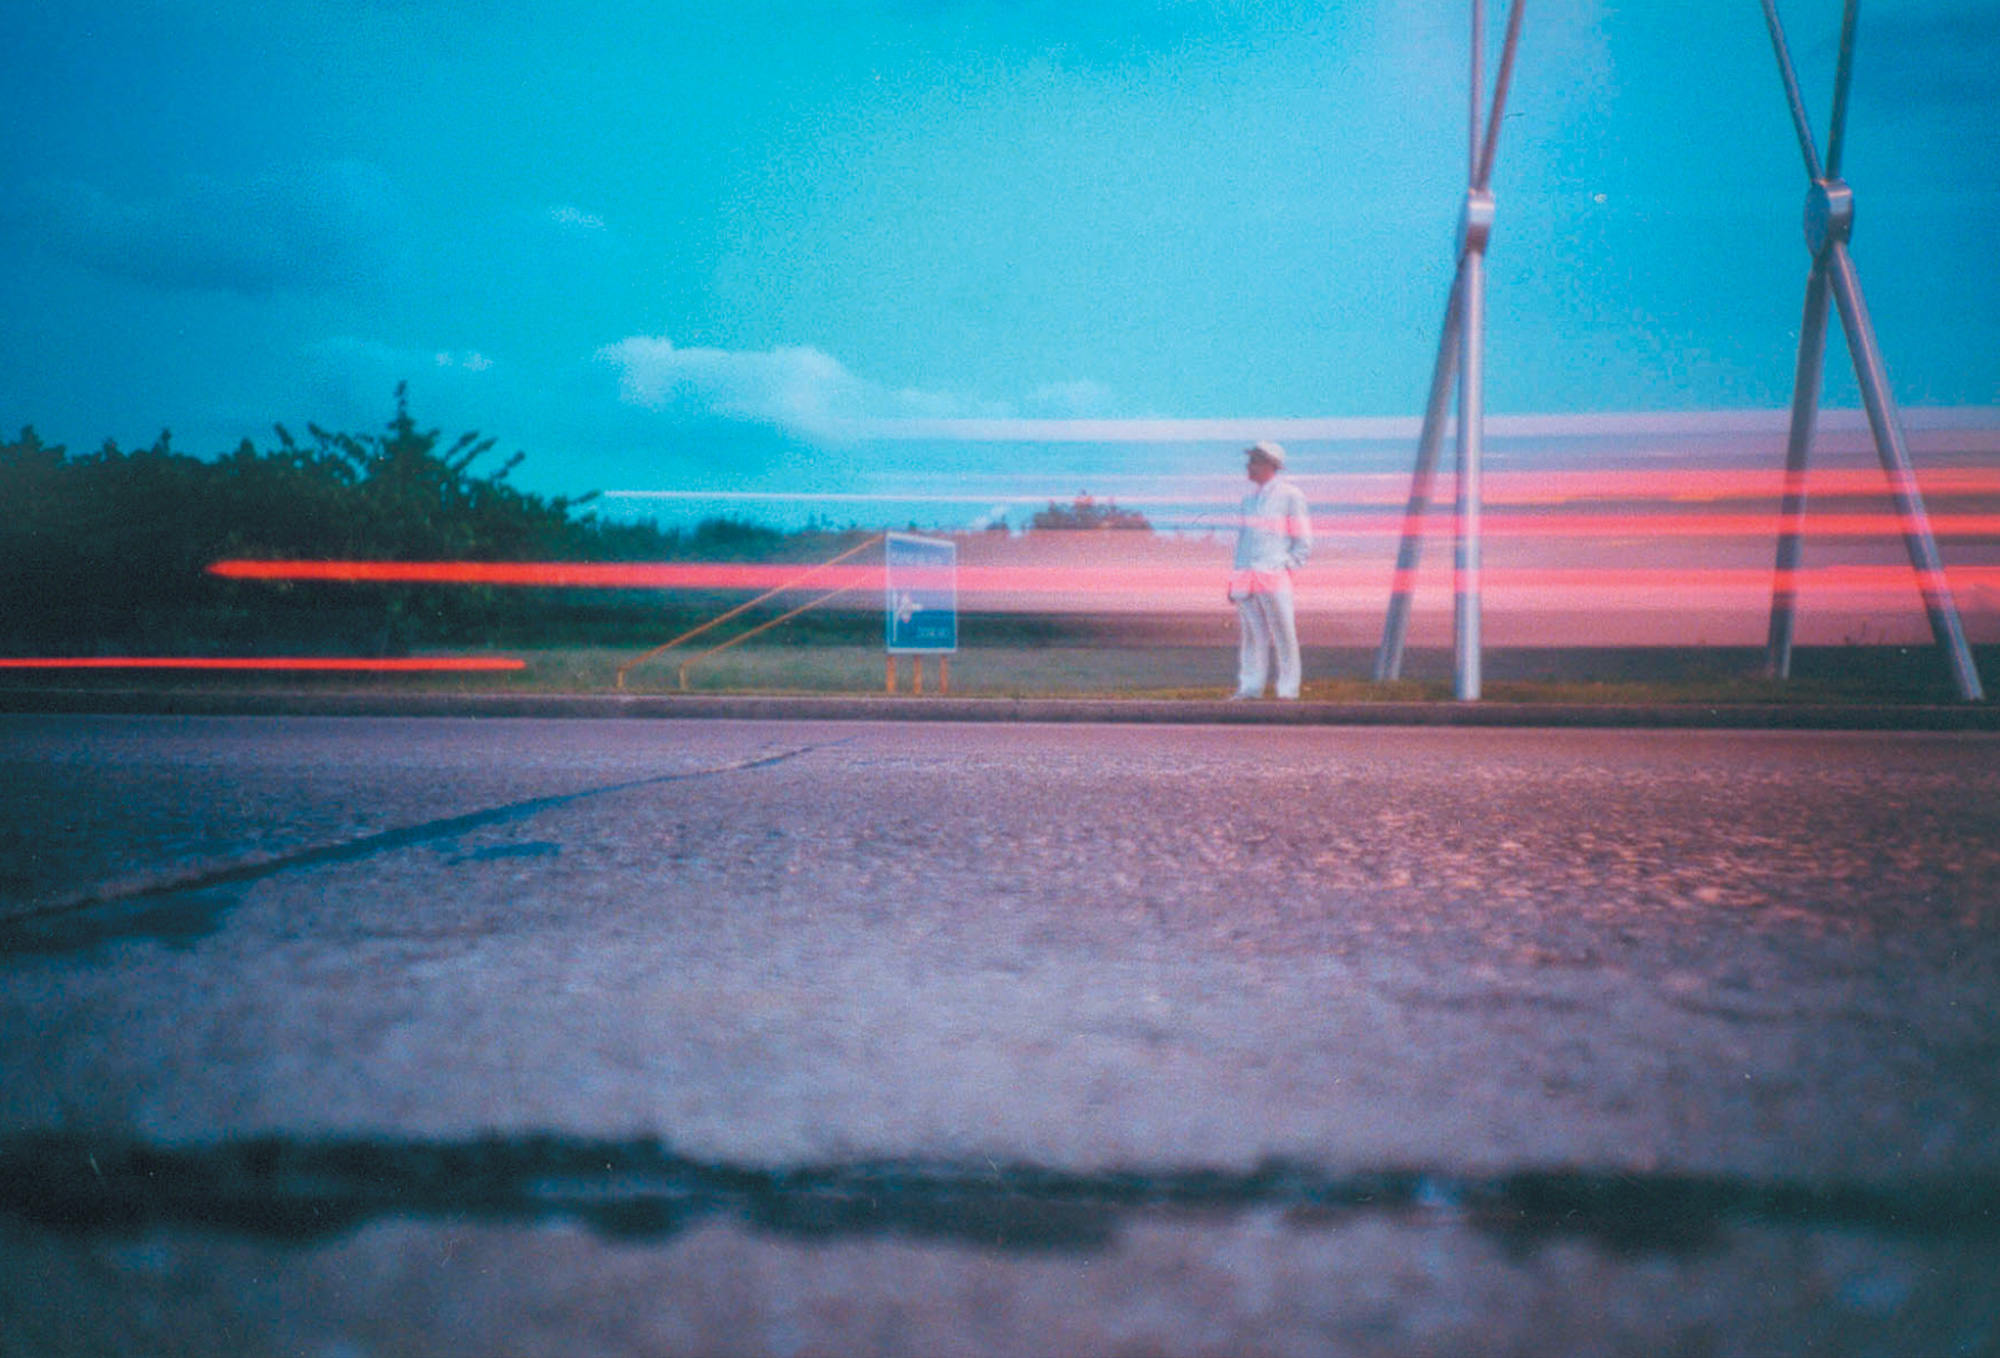 A Lomographic image depicting a man standing next to a road.